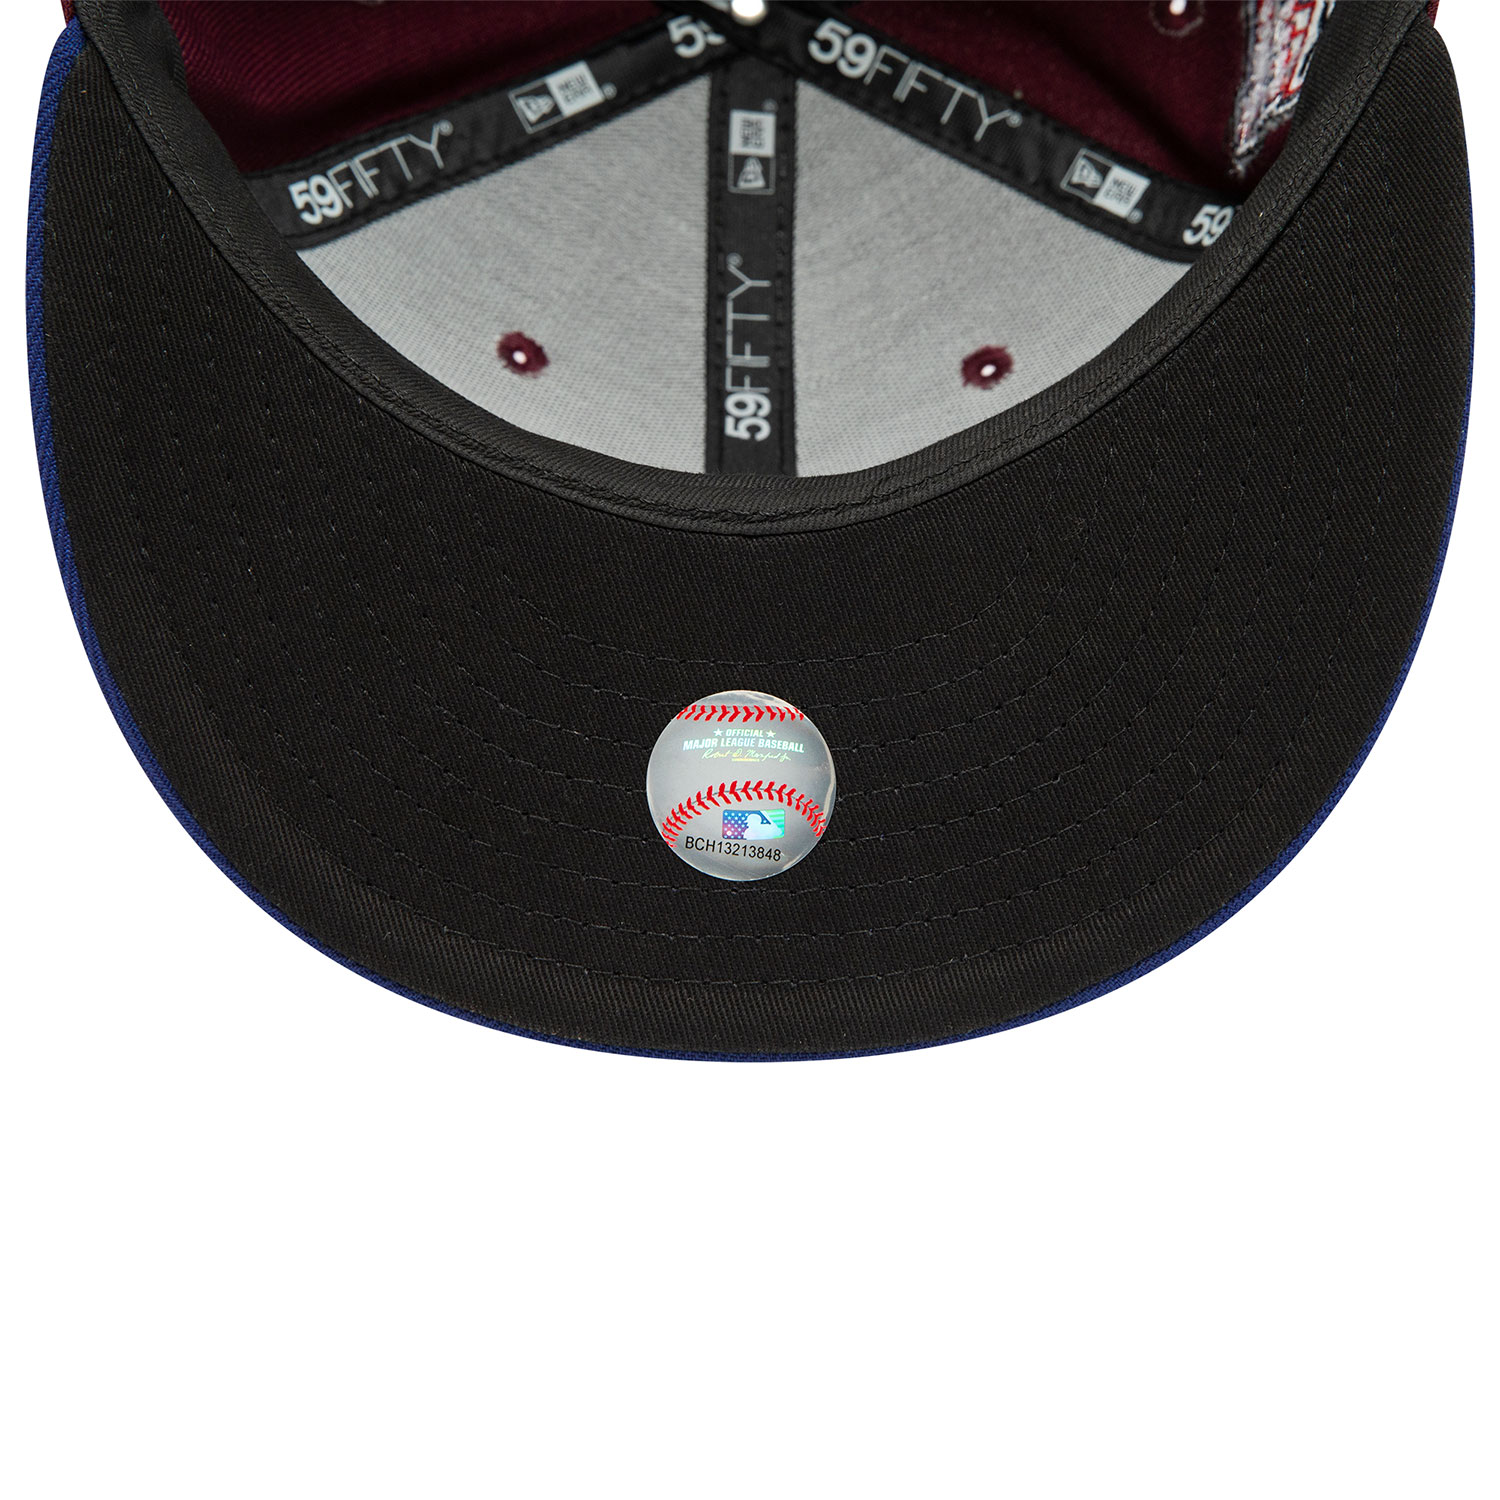 Chicago White Sox Fall Colours Contrast Visor Dark Red 59FIFTY Fitted Cap